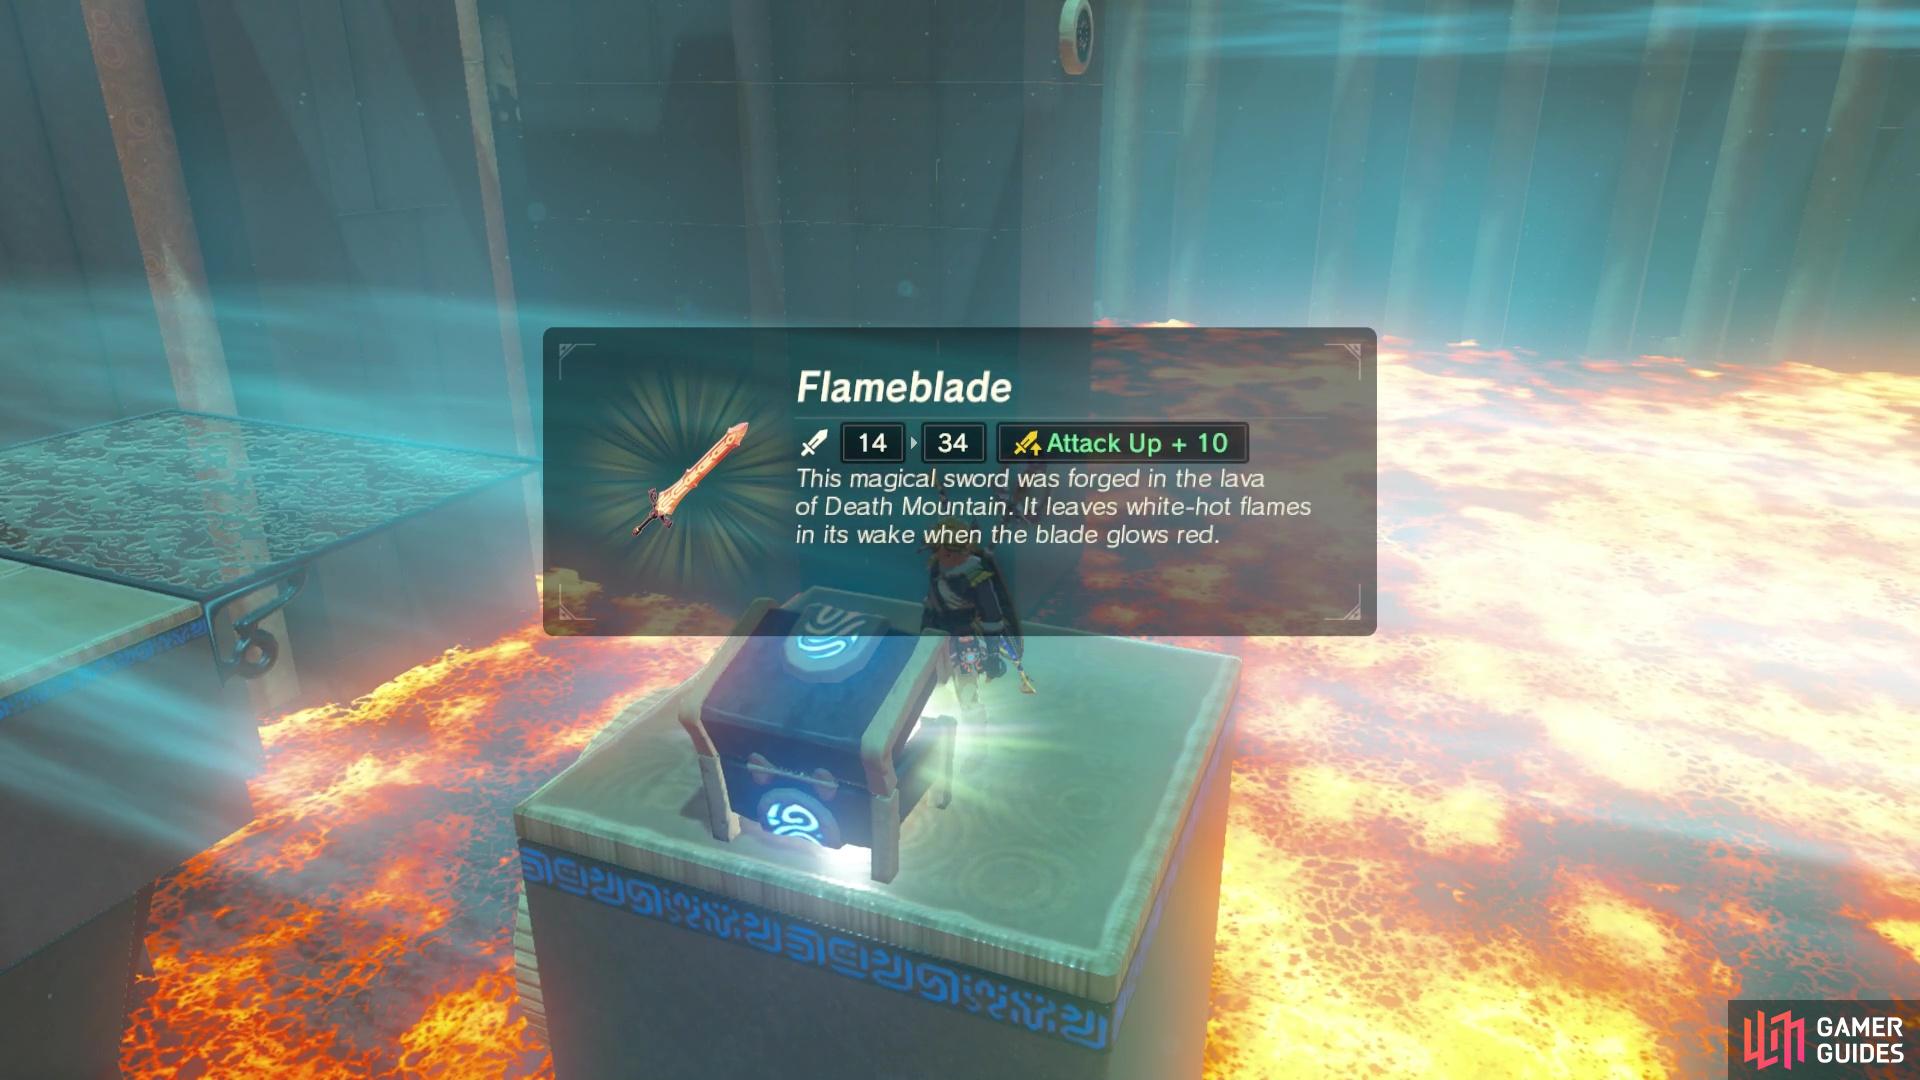 its worth it for this beefy Flameblade though!